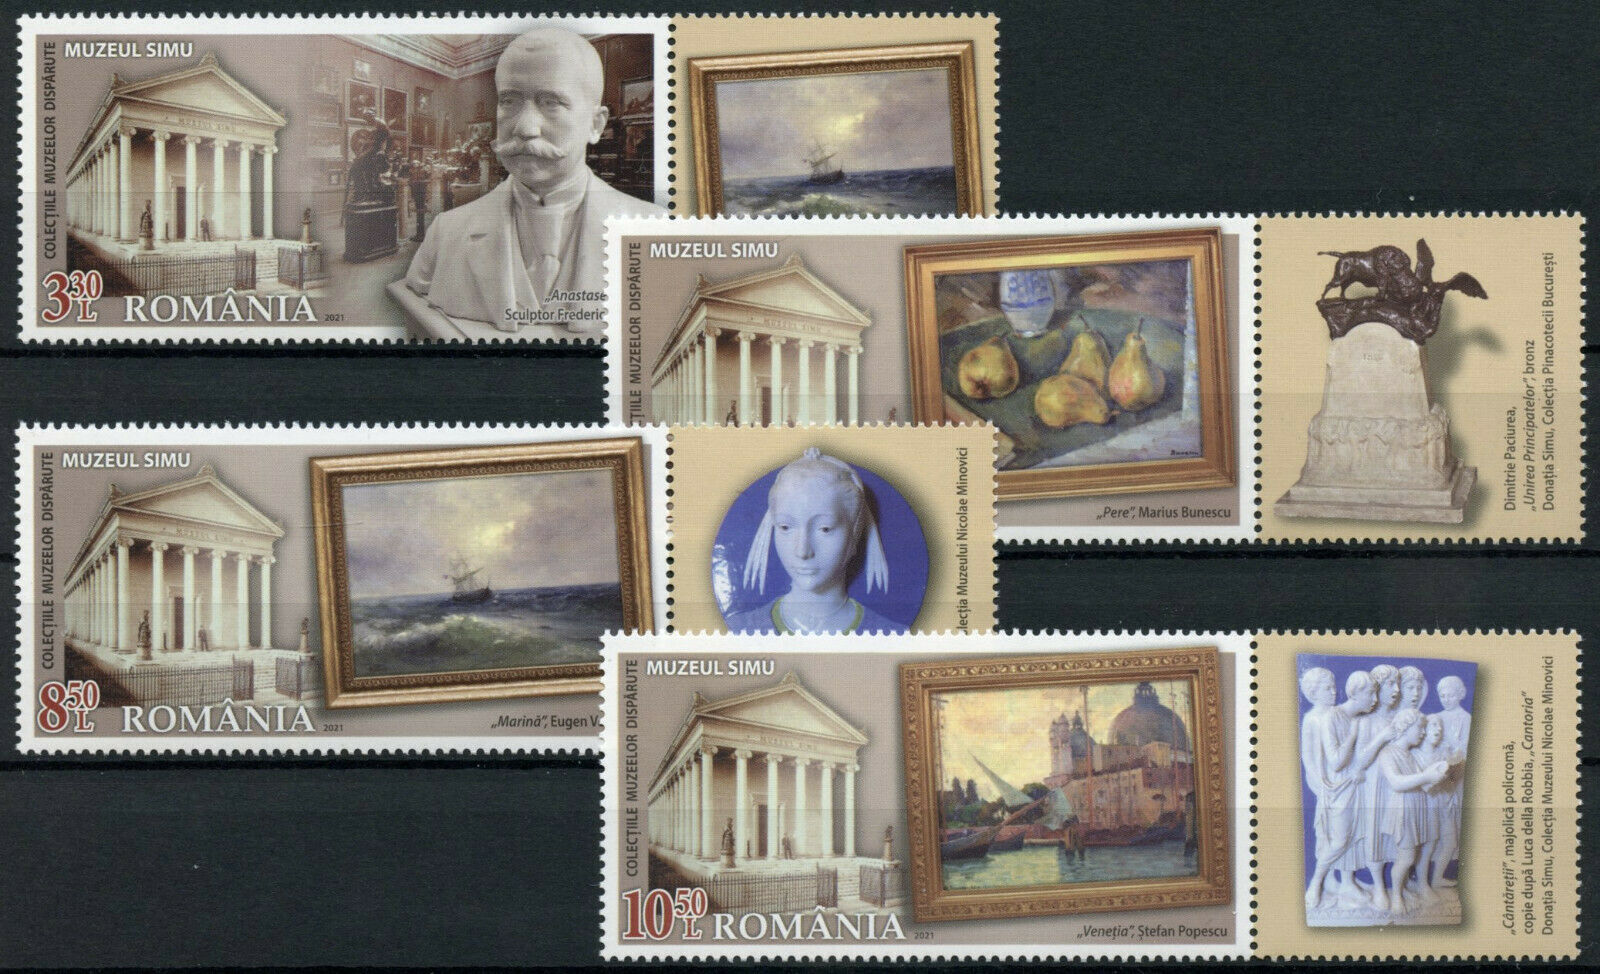 Romania Art Stamps 2021 MNH Collections of Lost Museums Simu Museum 4v Set